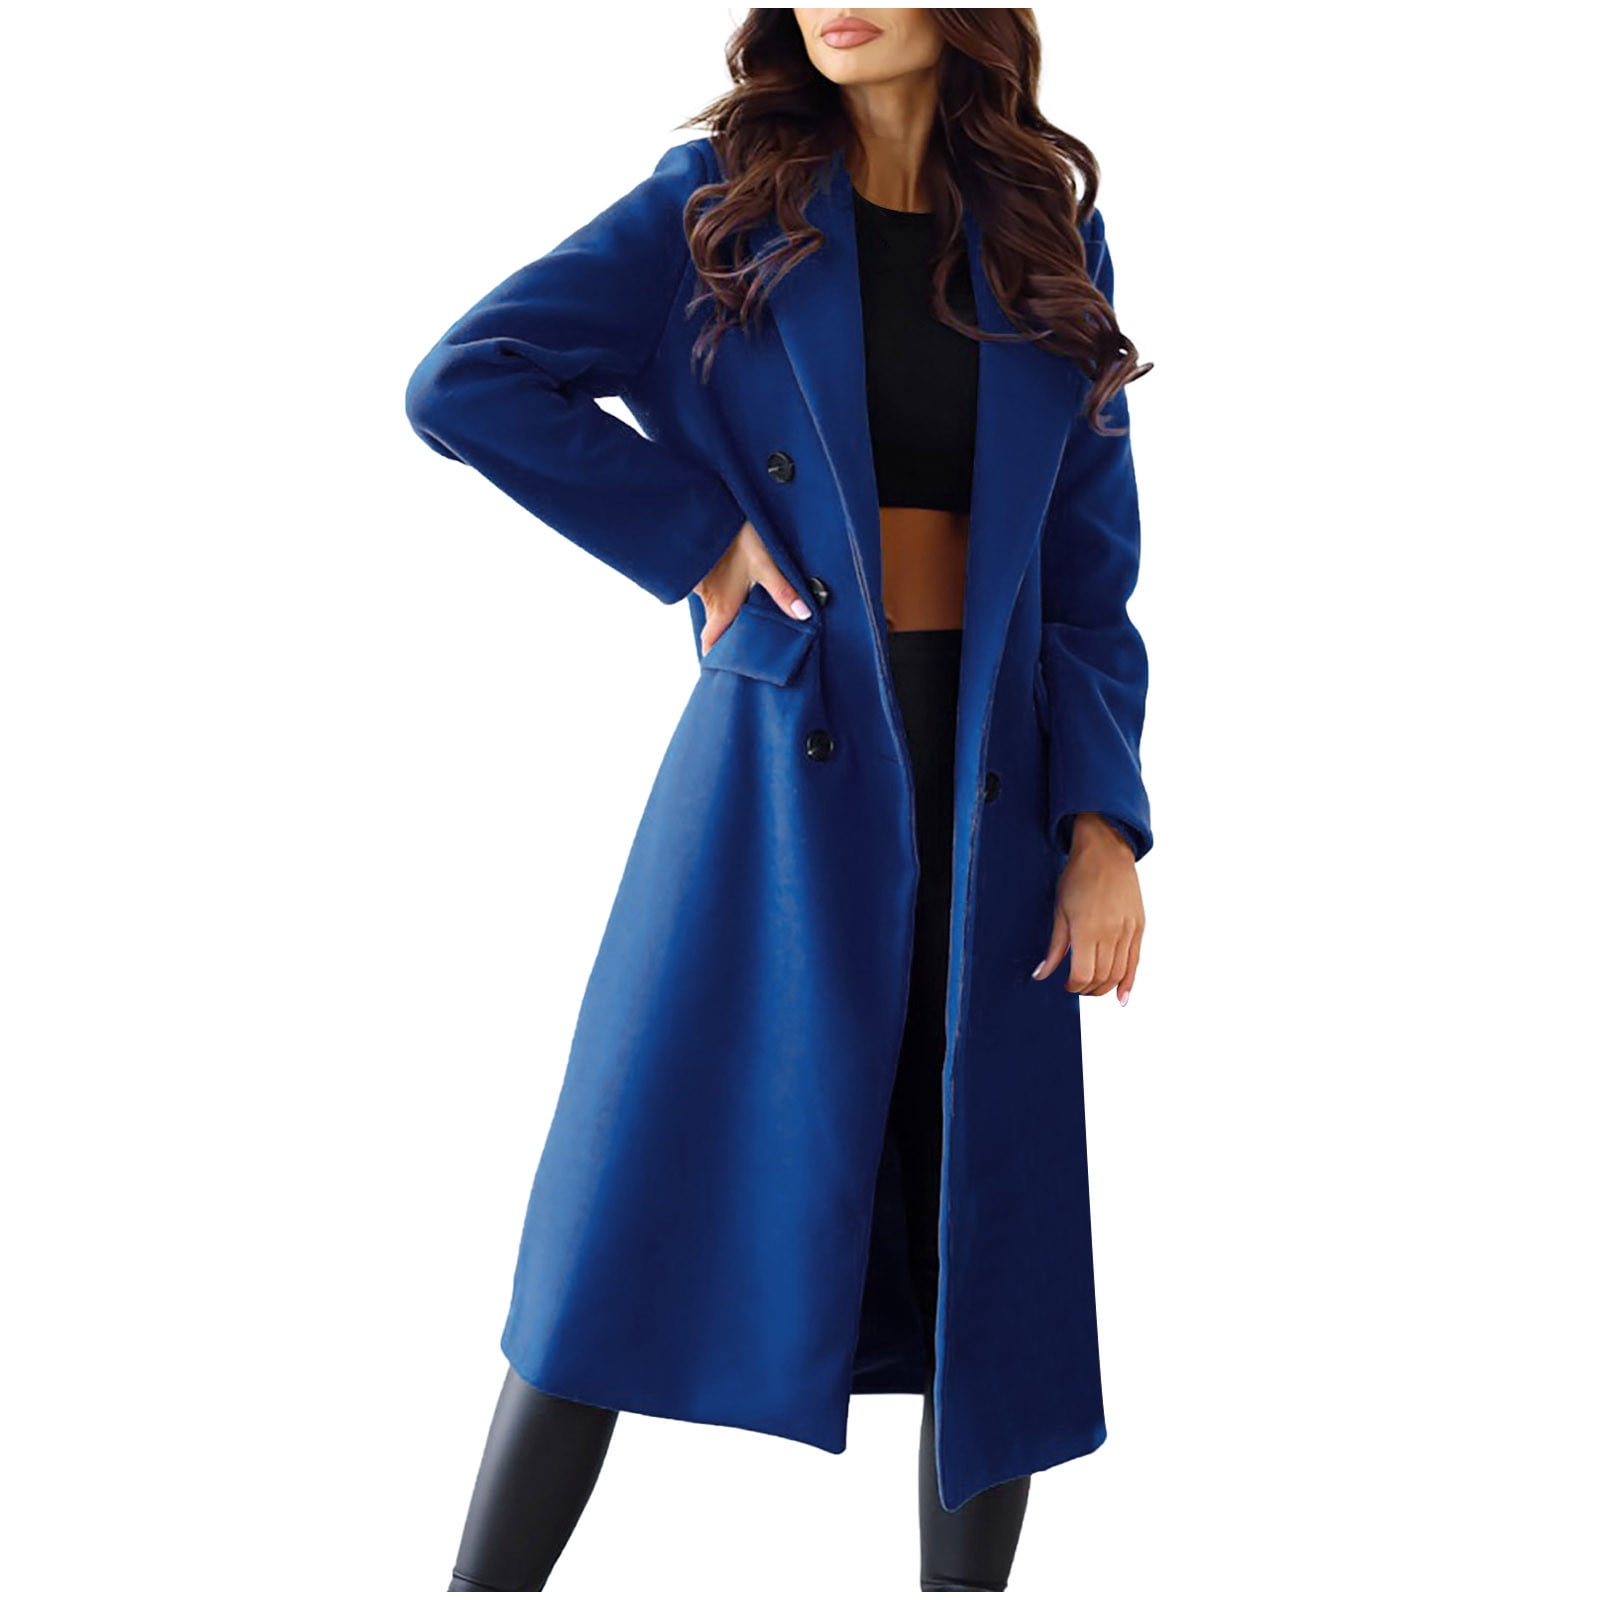  Women's 3/4 Length Double-Breasted Trench Coat with Belt Slim  Wool Trench Long Parka Coats Winter Maxi Jacket : Clothing, Shoes & Jewelry